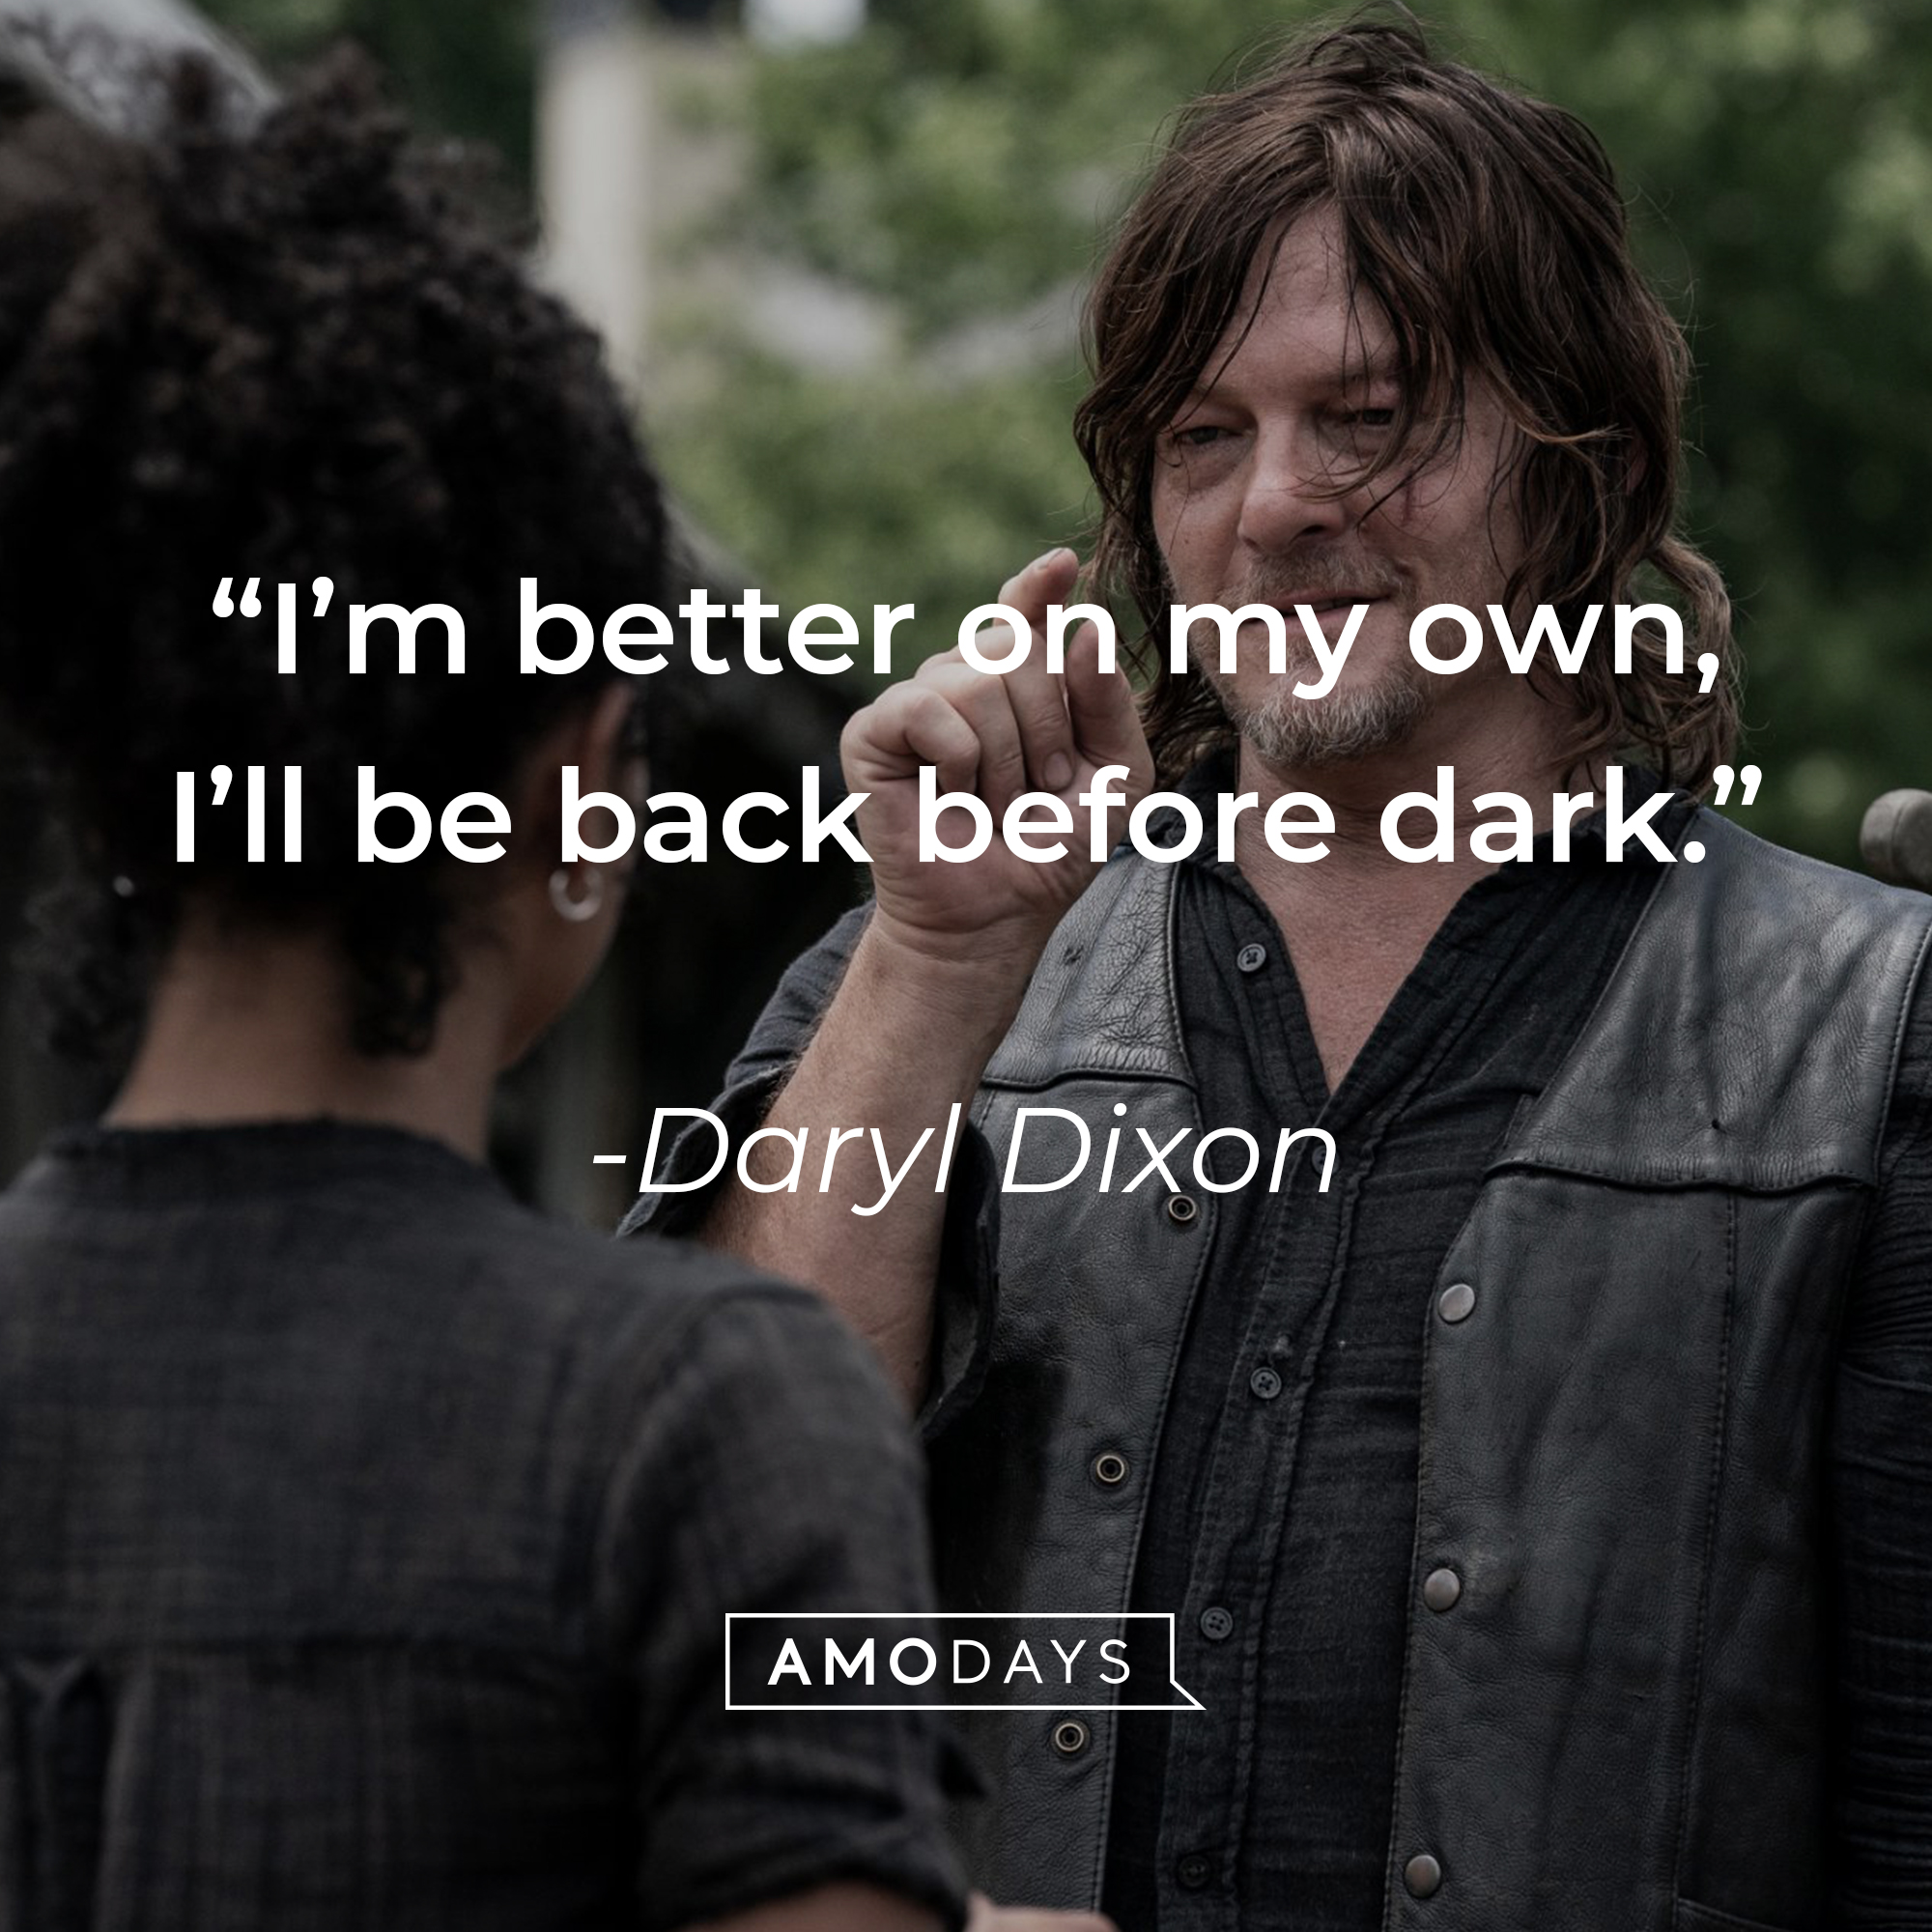 An image of Daryl Dixon with his quote: “I’m better on my own, I’ll be back before dark.” | Source: facebook.com/TheWalkingDeadAMC